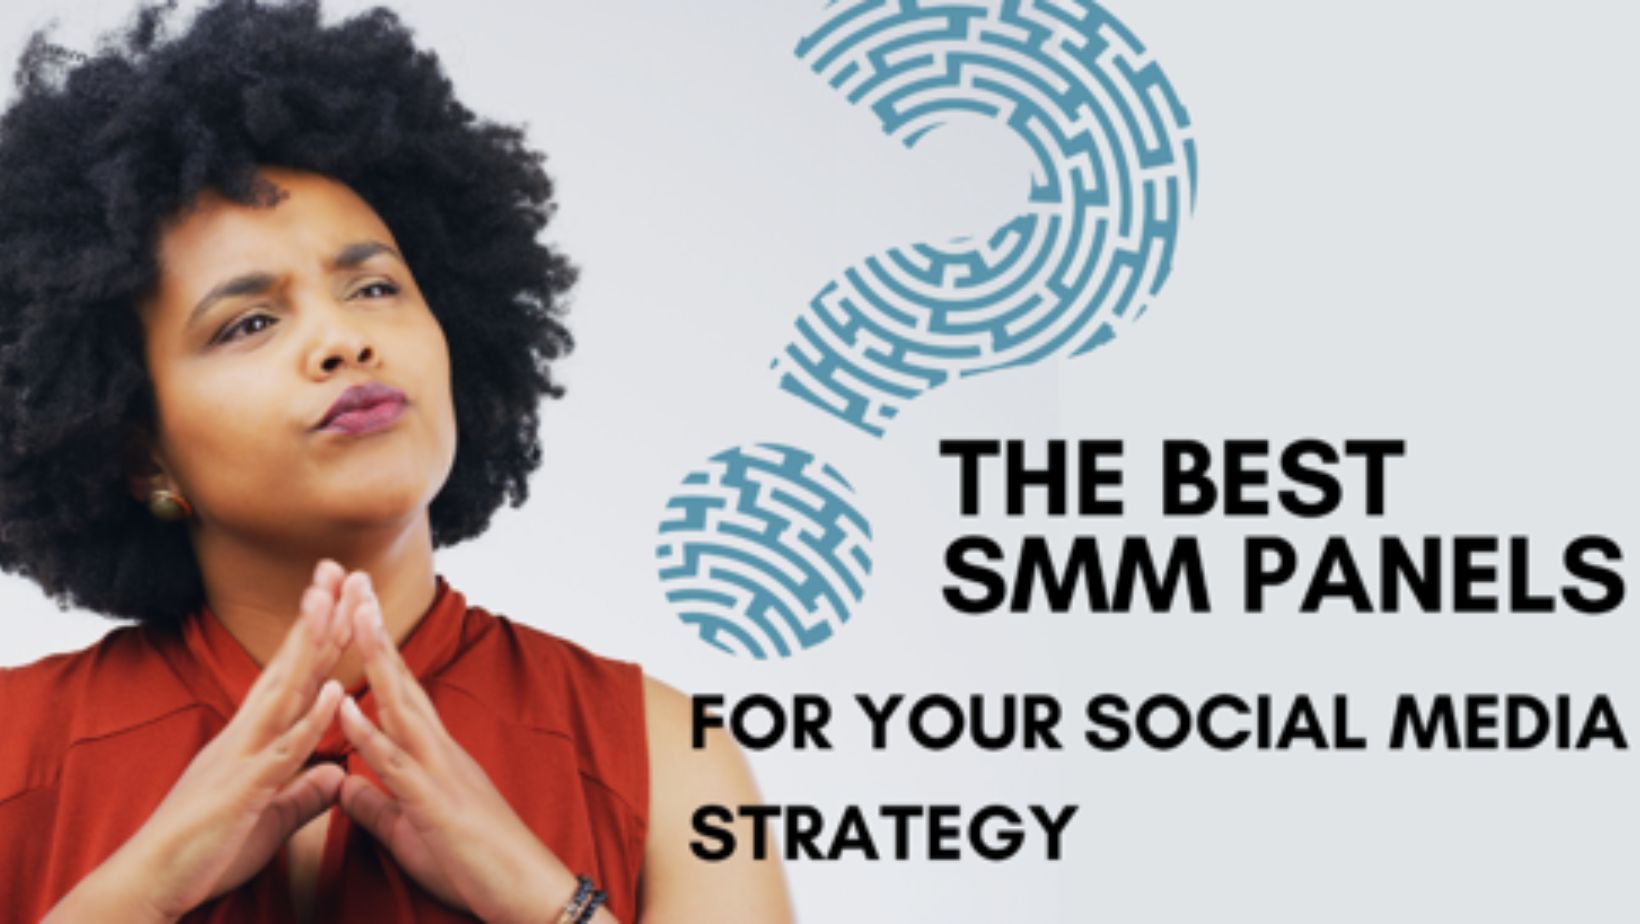 The Leading SMM Panels For Your Social Media Strategy